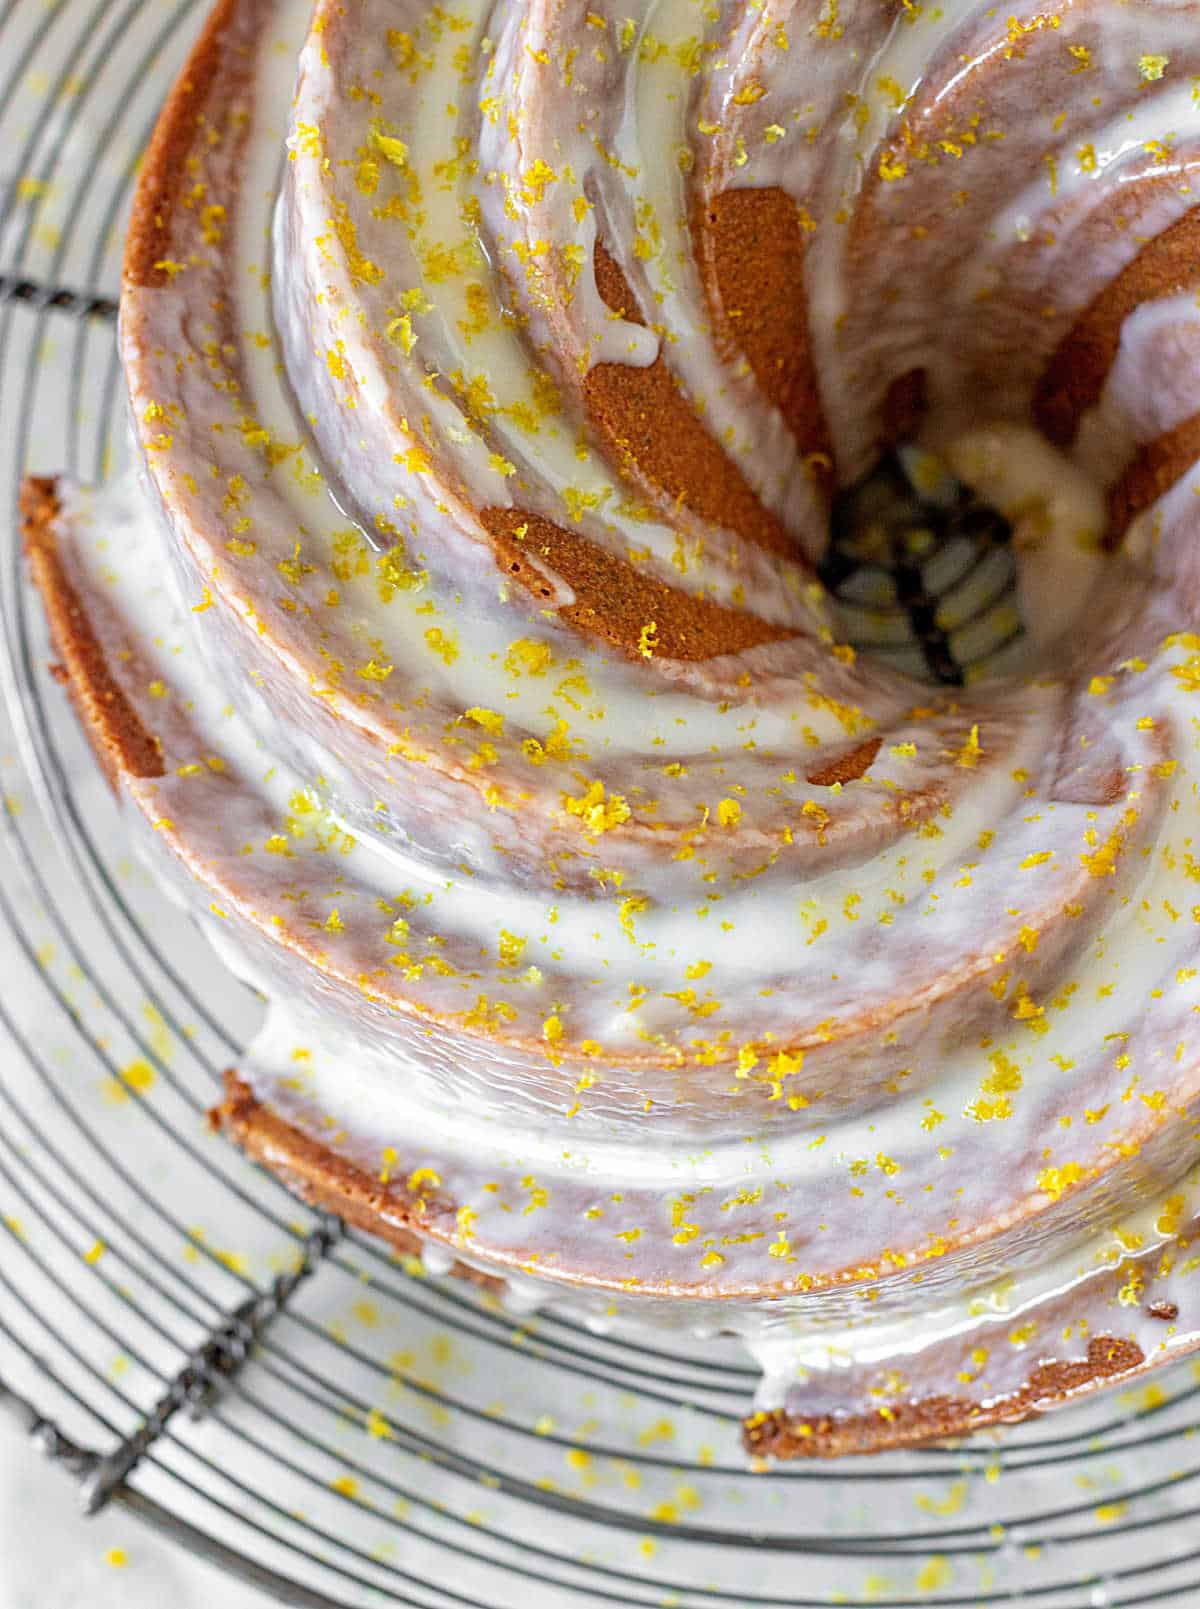 Top view of partial glazed bundt cake with lemon zest on a wire rack.